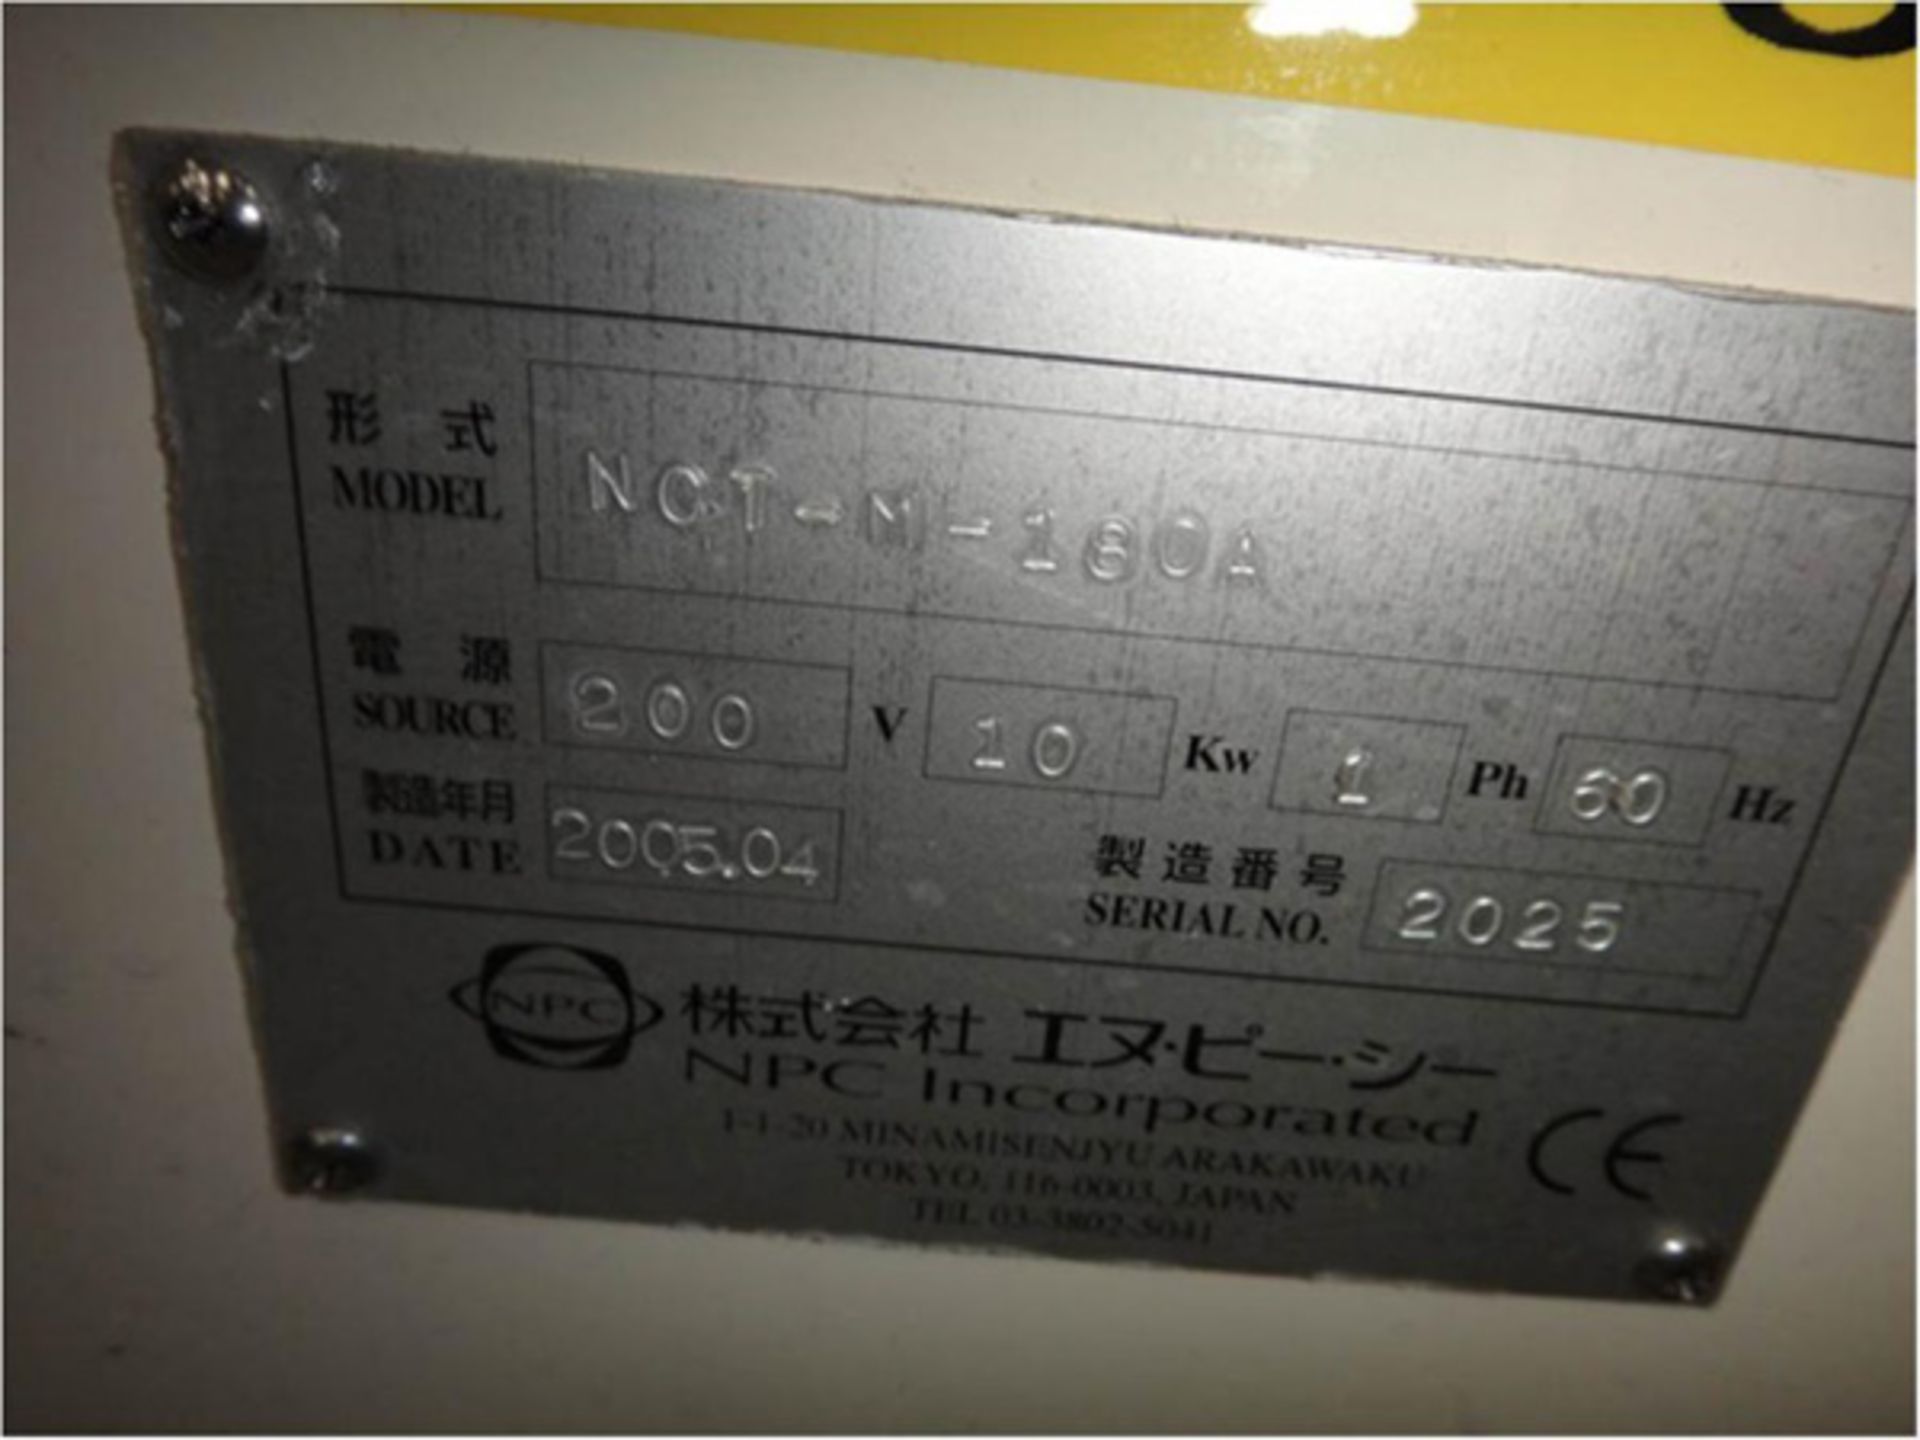 NPC Incorp Solar Cell Tester, Mdl: NCT-M-180A, S/N: 2025, Located In: Huntington Park, CA - Image 4 of 10